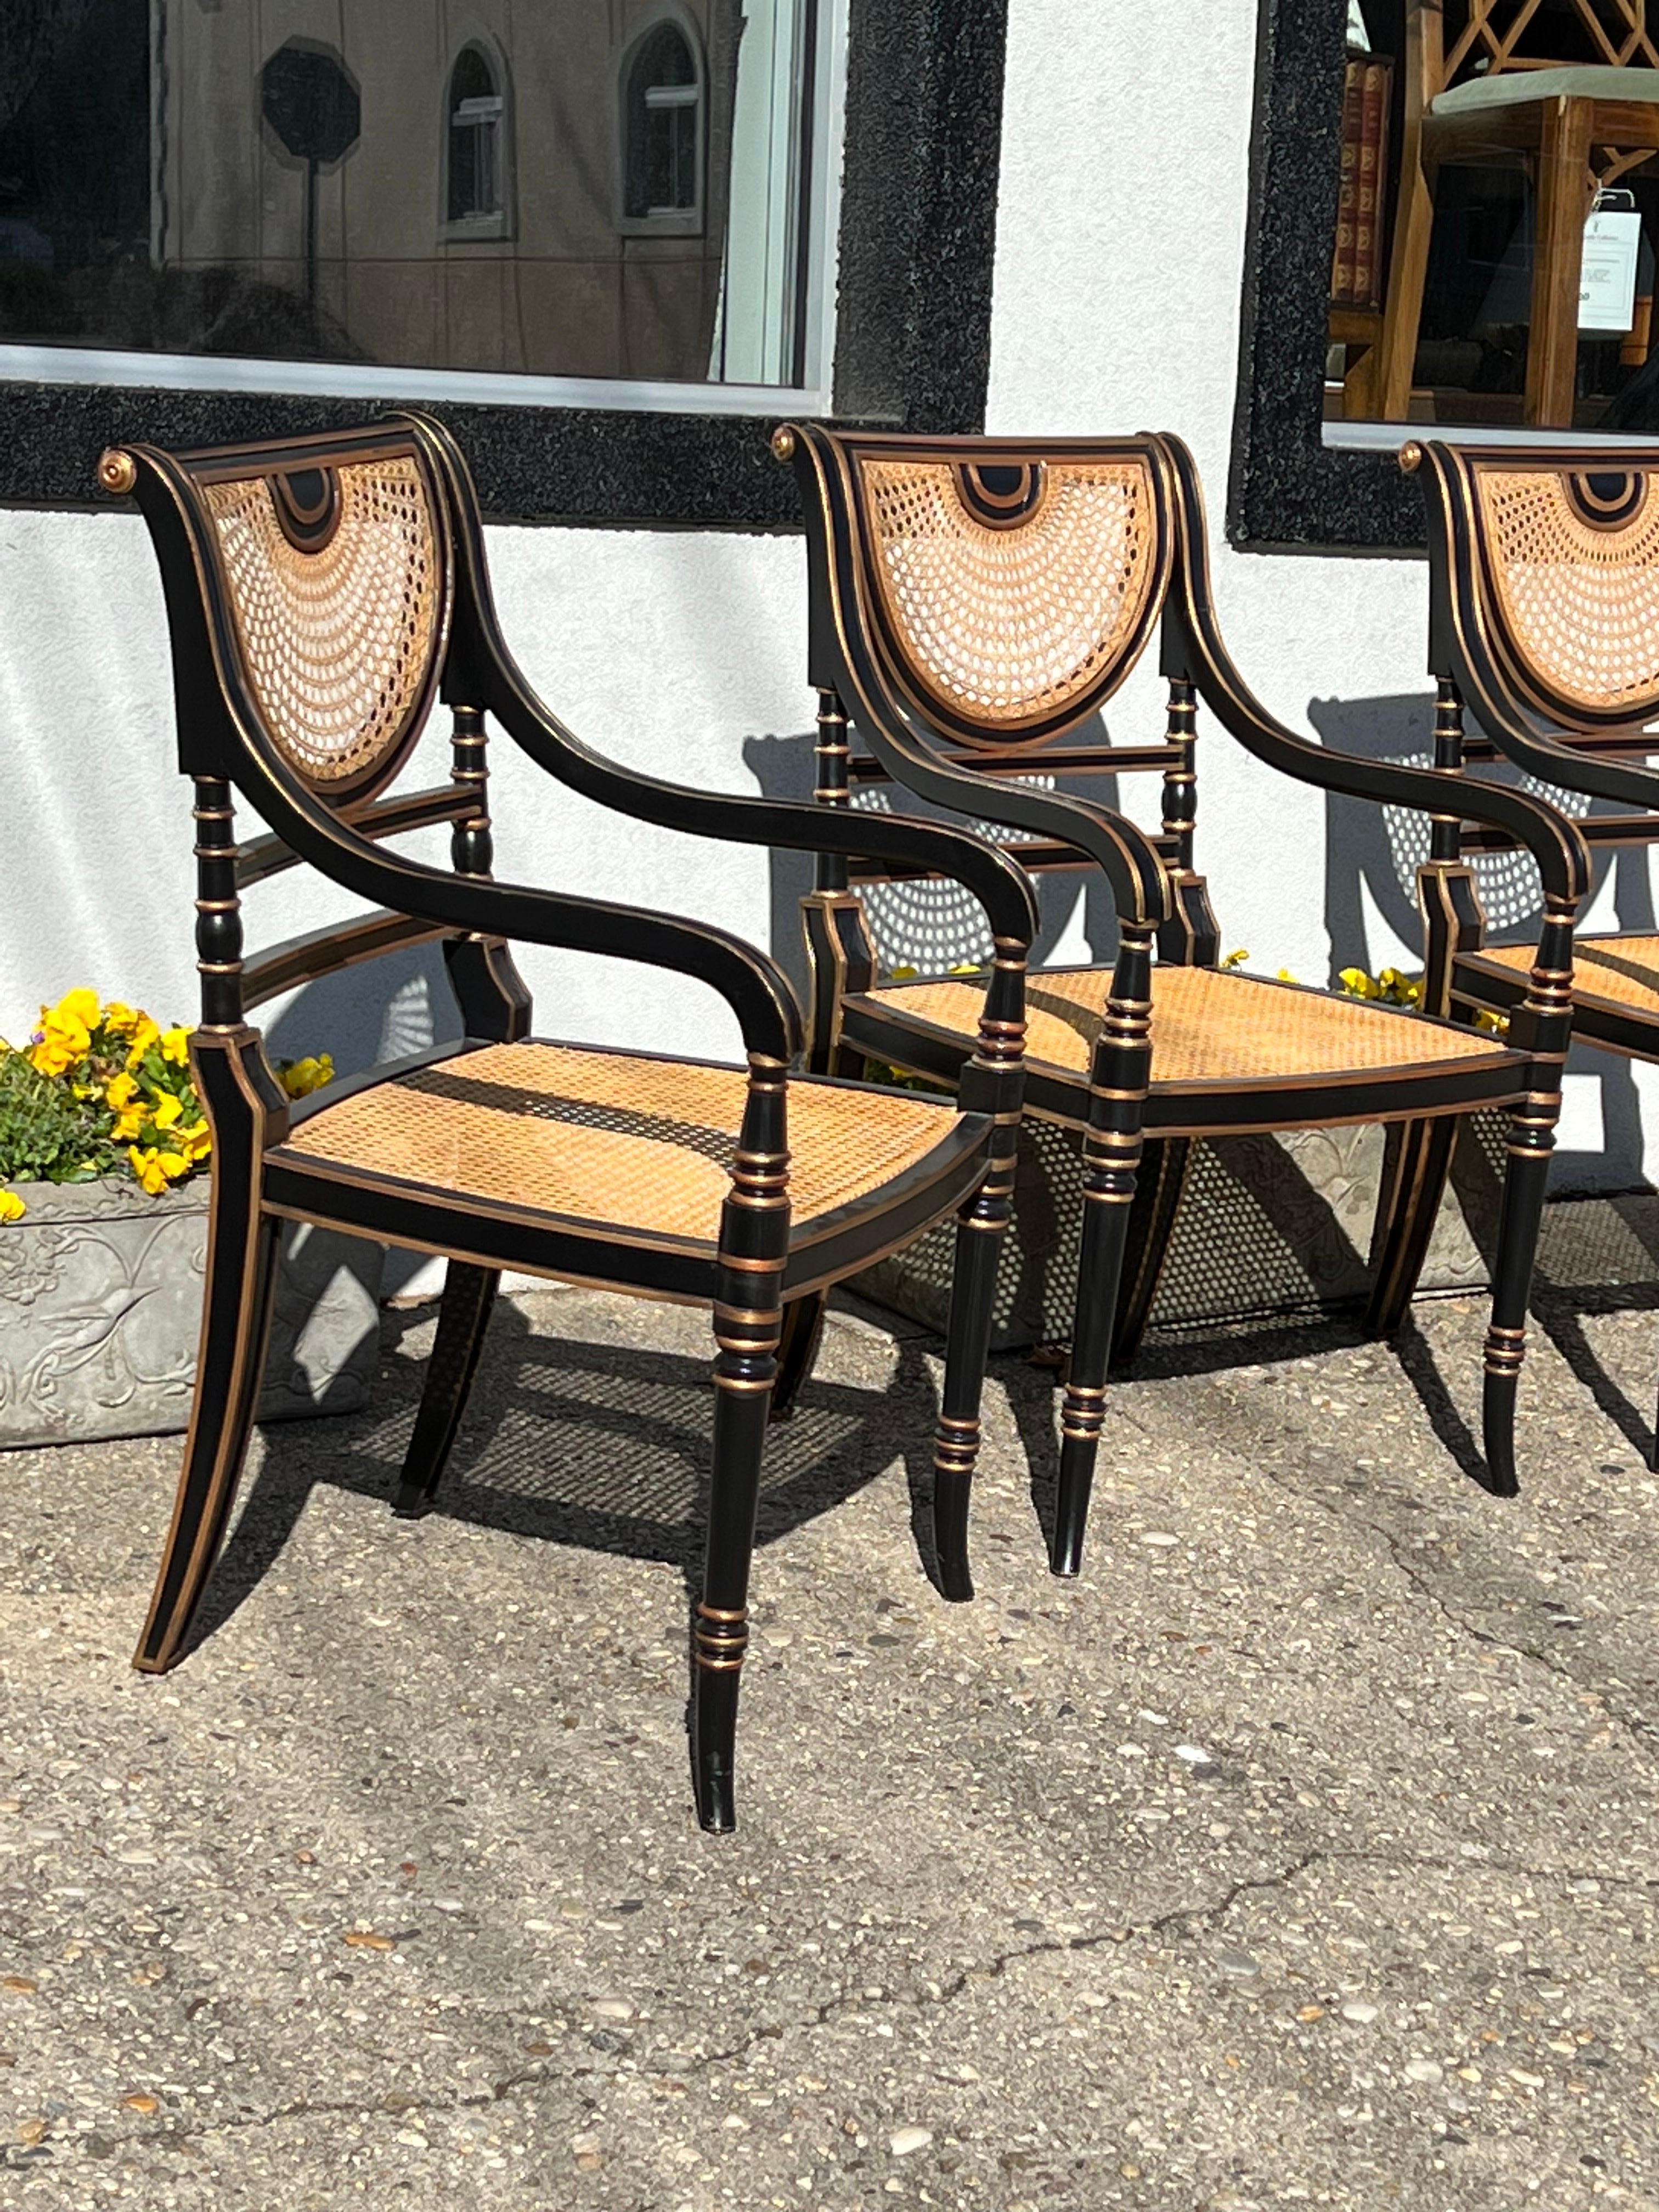 A set of 4 Smith & Watson Regency Style Caned Armchairs.
Each Armchair with tie on loose seats, used but presentable condition. 
Chairs were touched up and waxed.